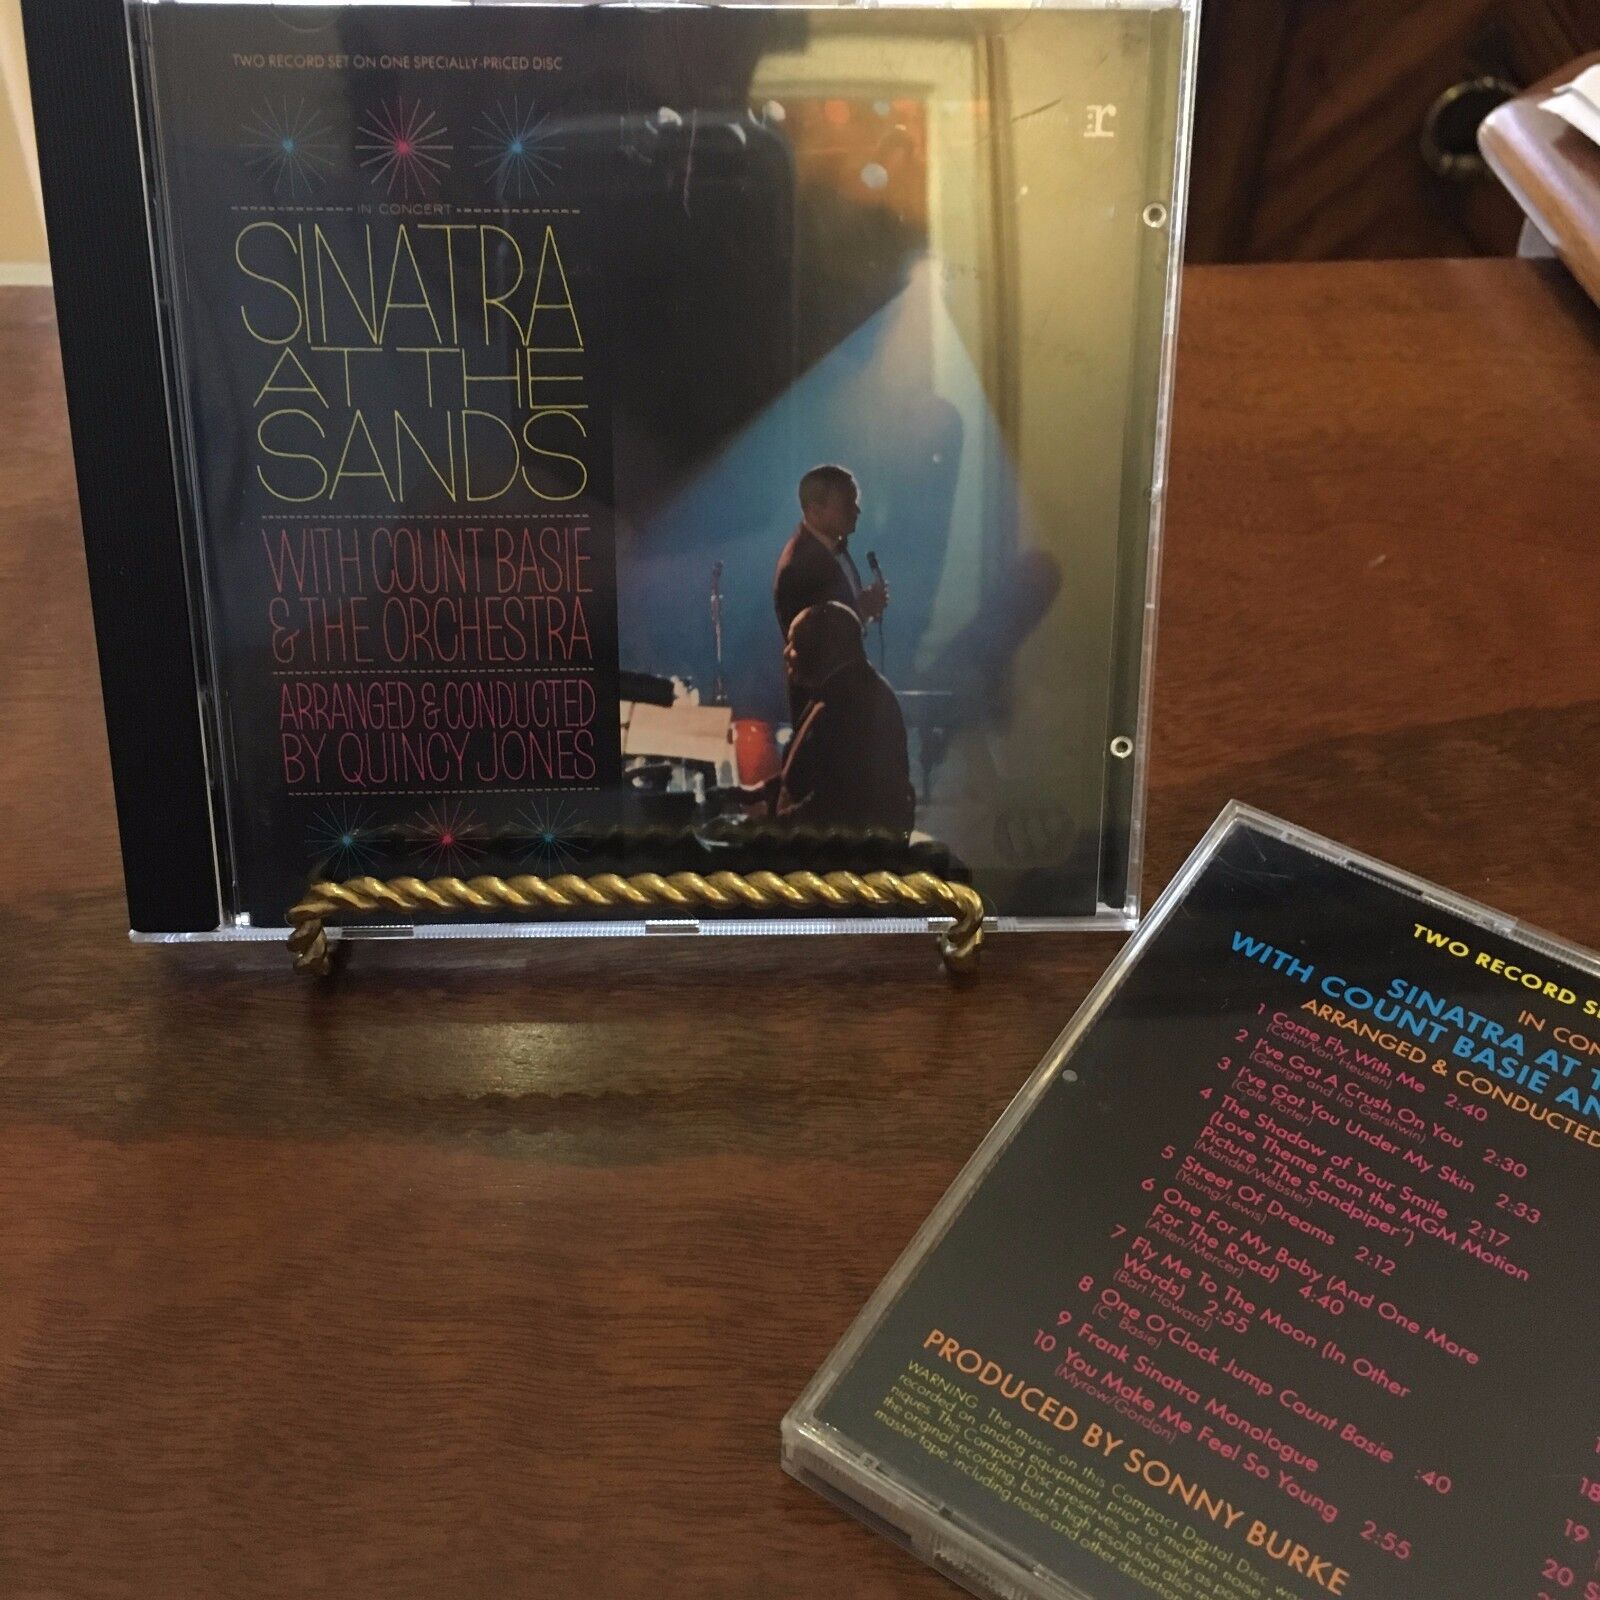 Sinatra at the Sands [Remaster] by Count Basie Orchestra/Frank Sinatra CD, 